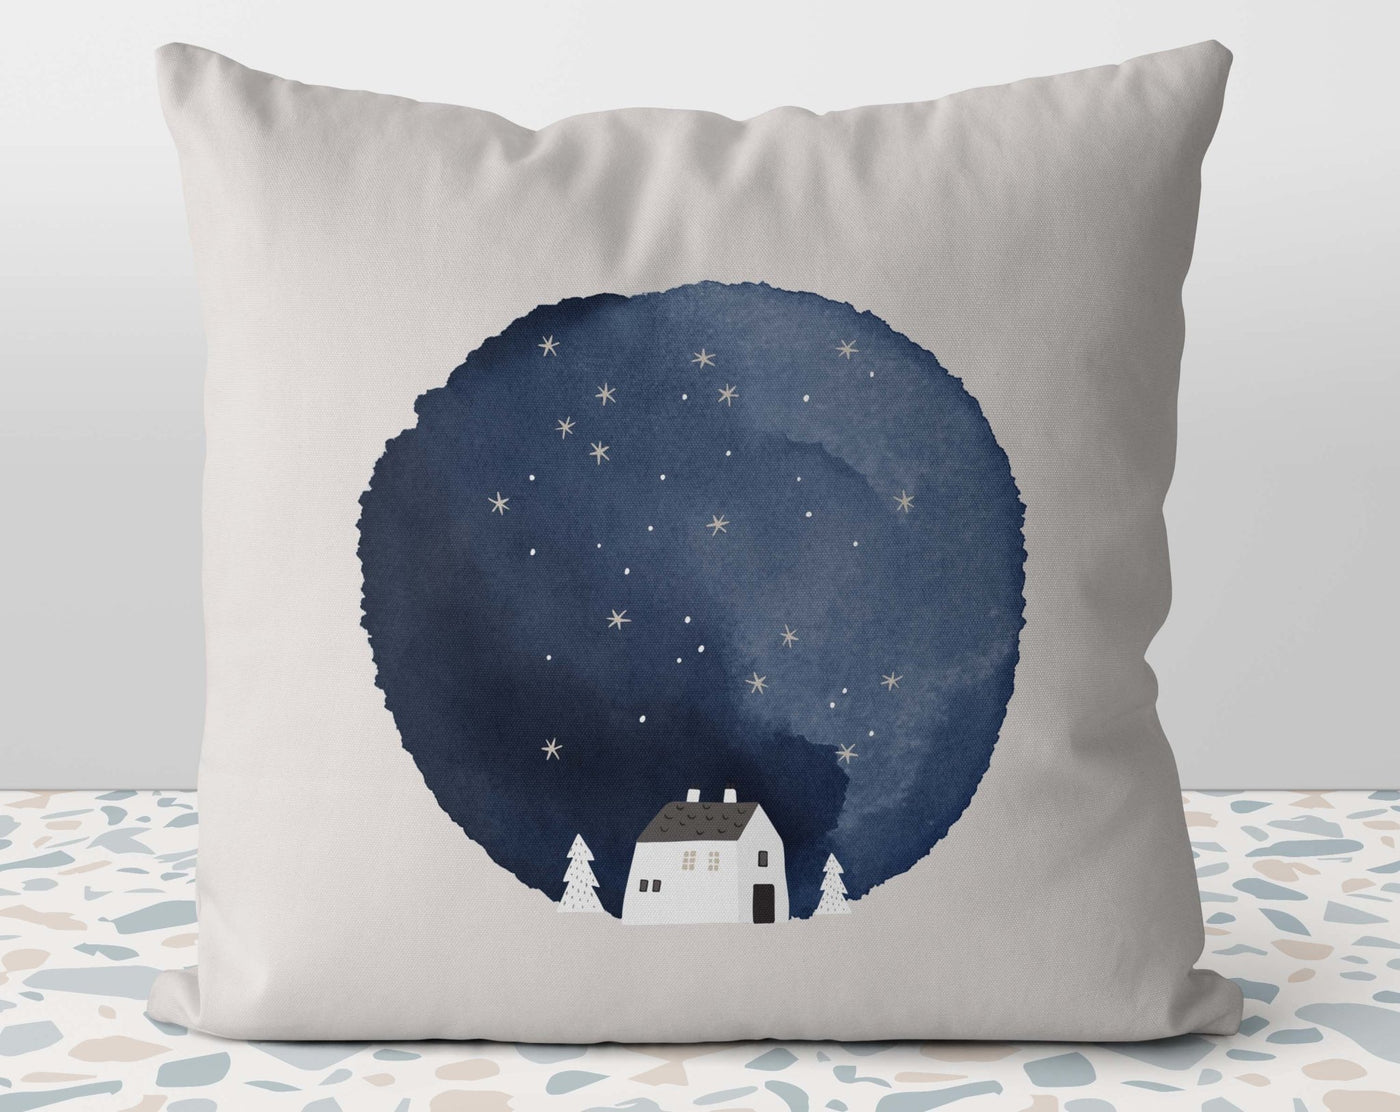 Christmas Town Village Starry Night Season Greetings Blue Beige Square Pillow with Cover Throw with Insert - Cush Potato Pillows